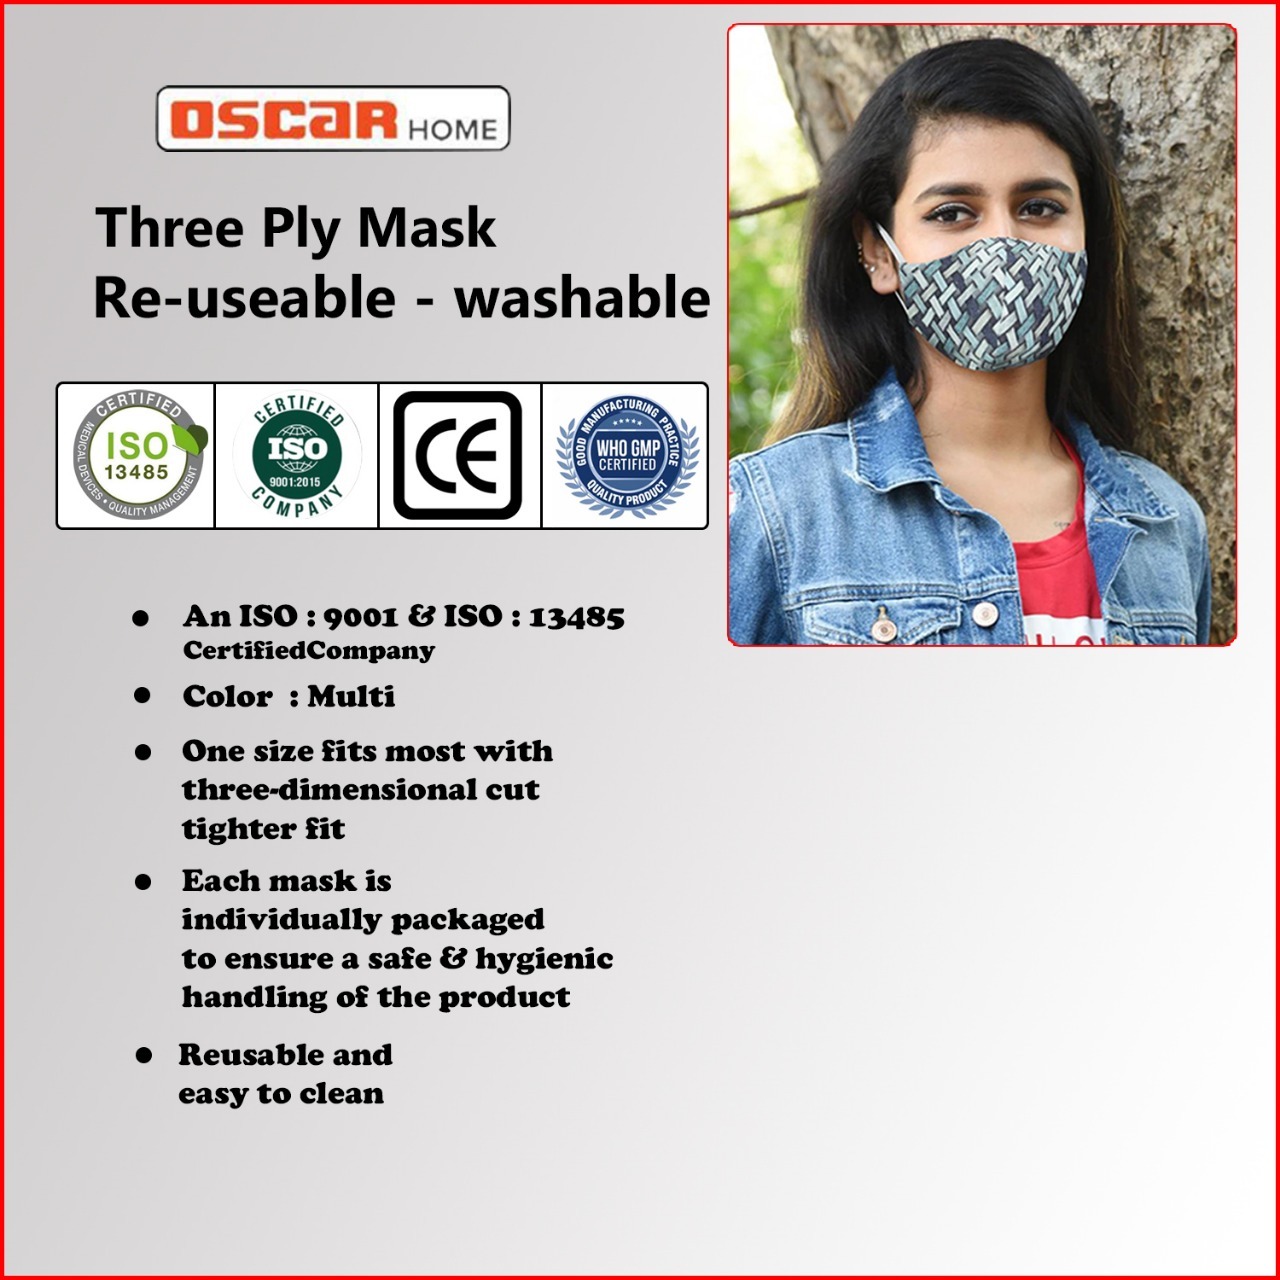 Printed and Reusable Face mask WHO/CE Certified